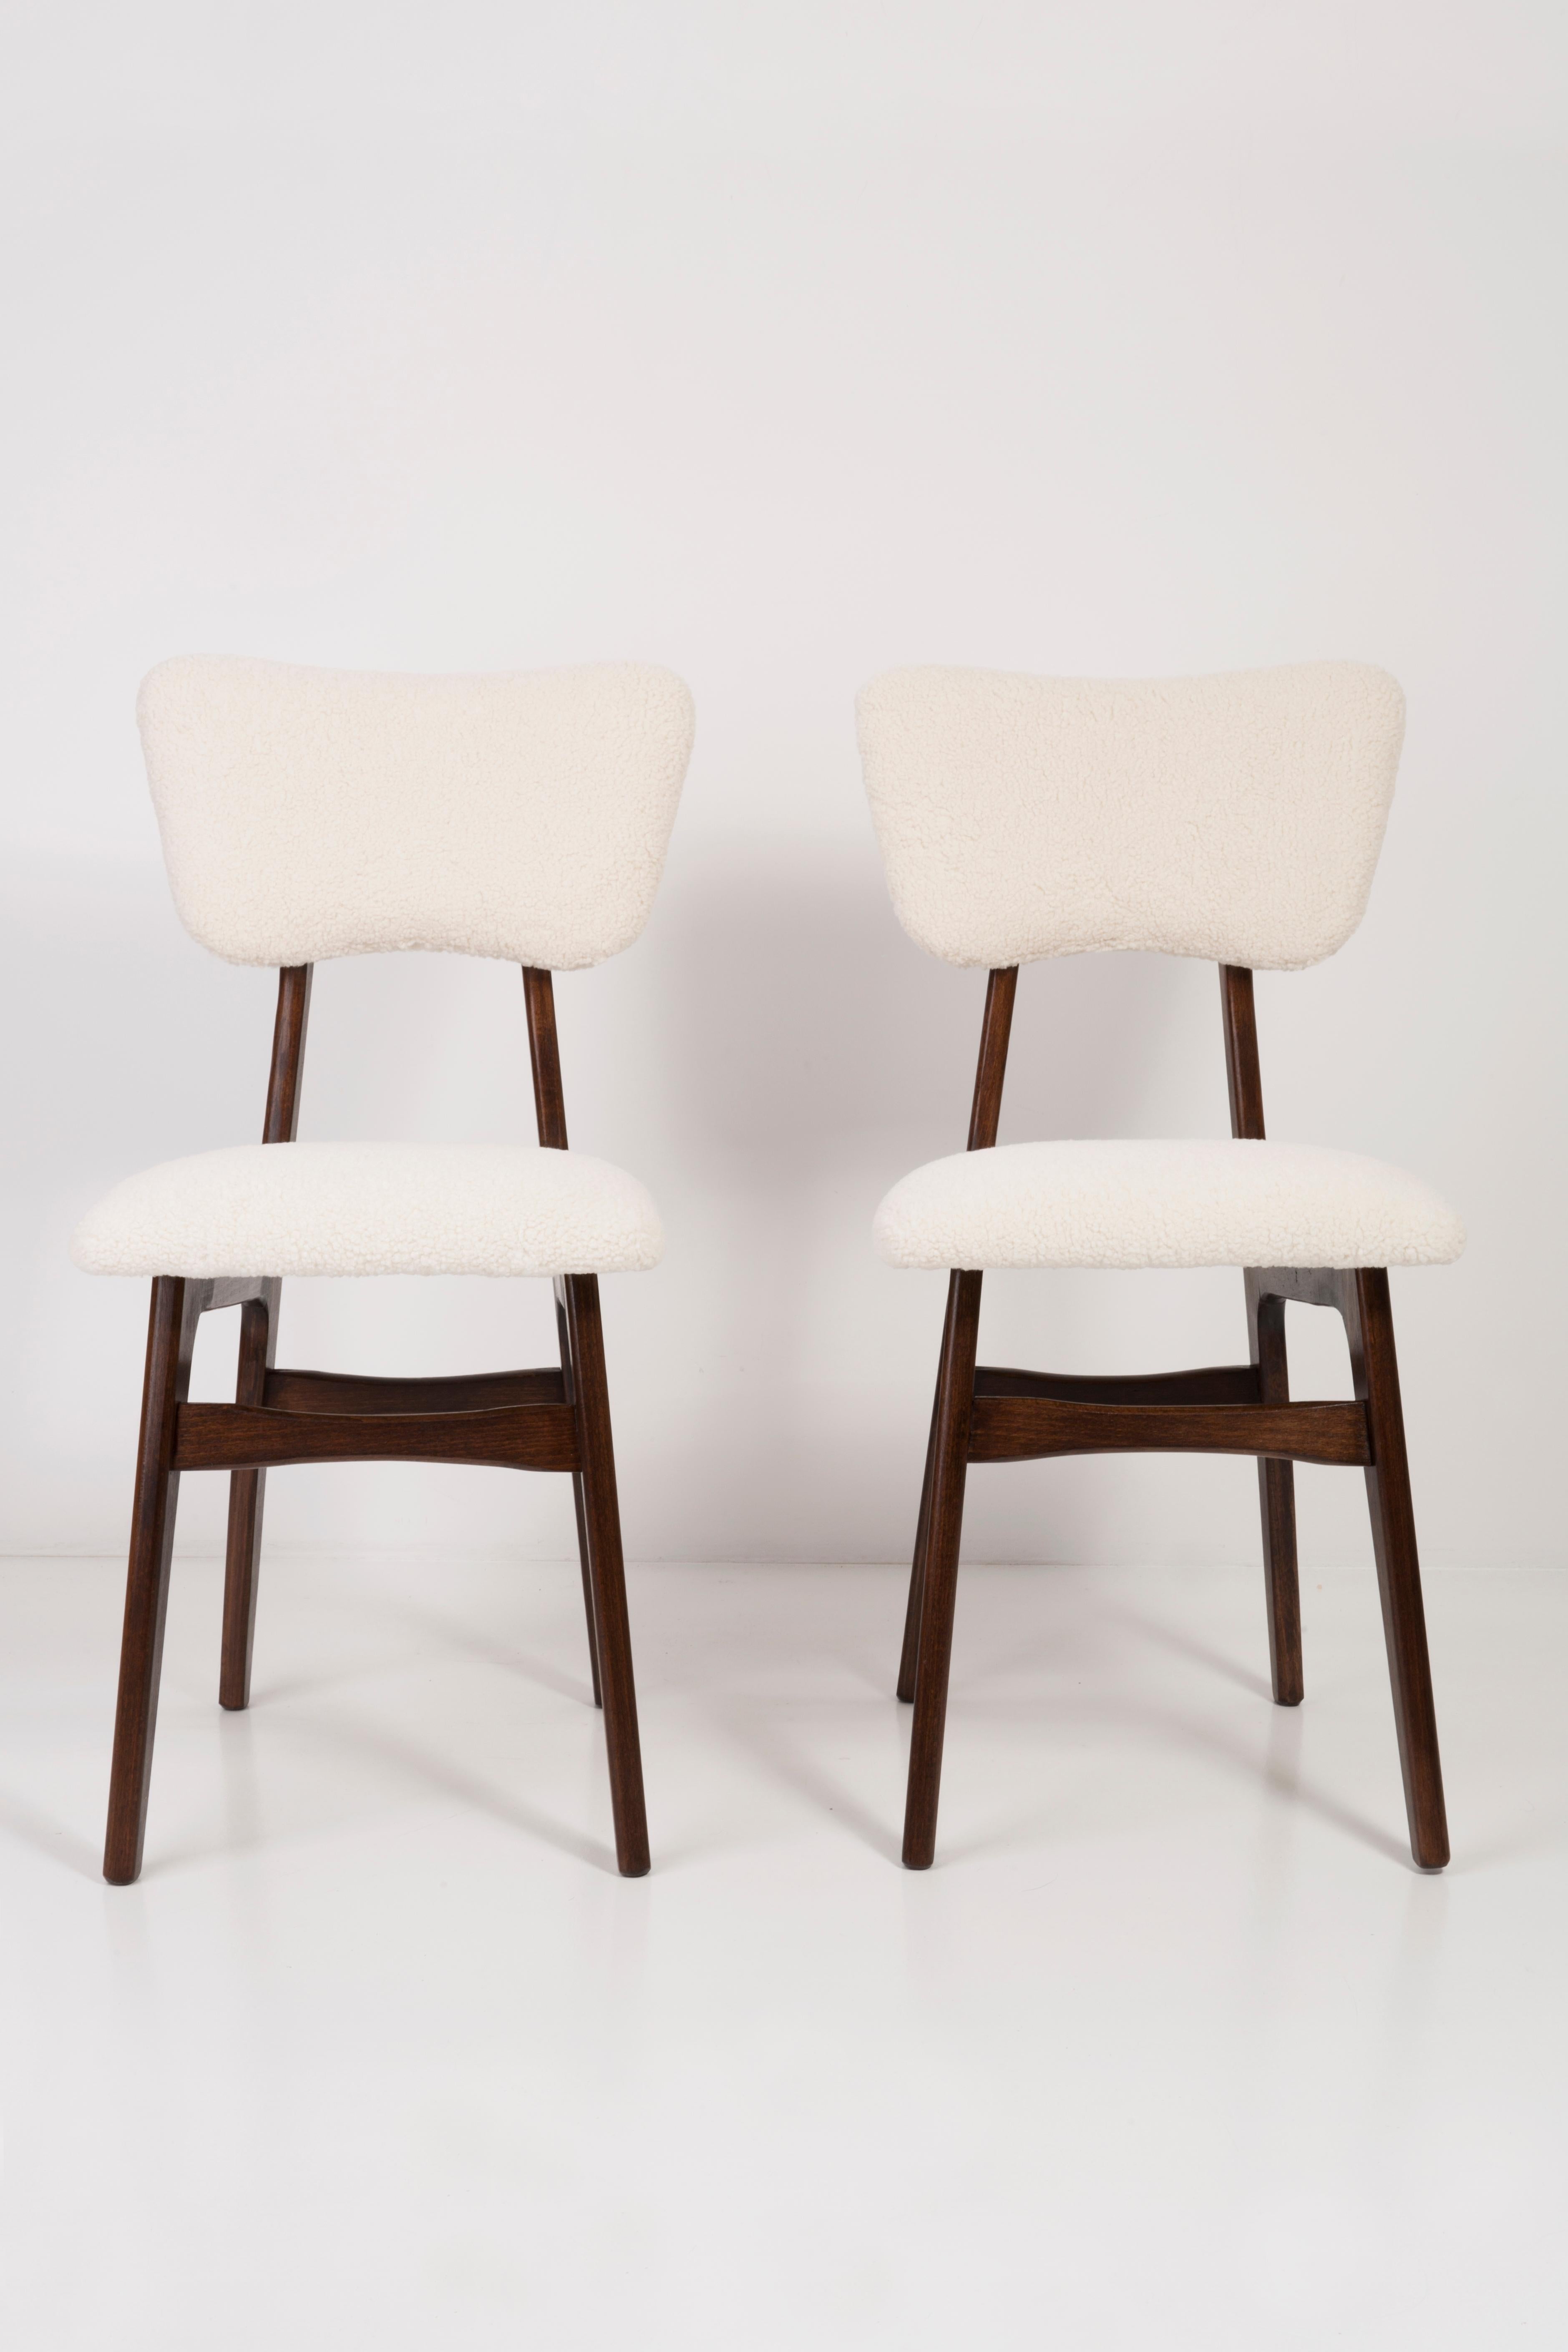 Pair of 20th Century Light Crème Boucle Chairs, 1960s For Sale 2